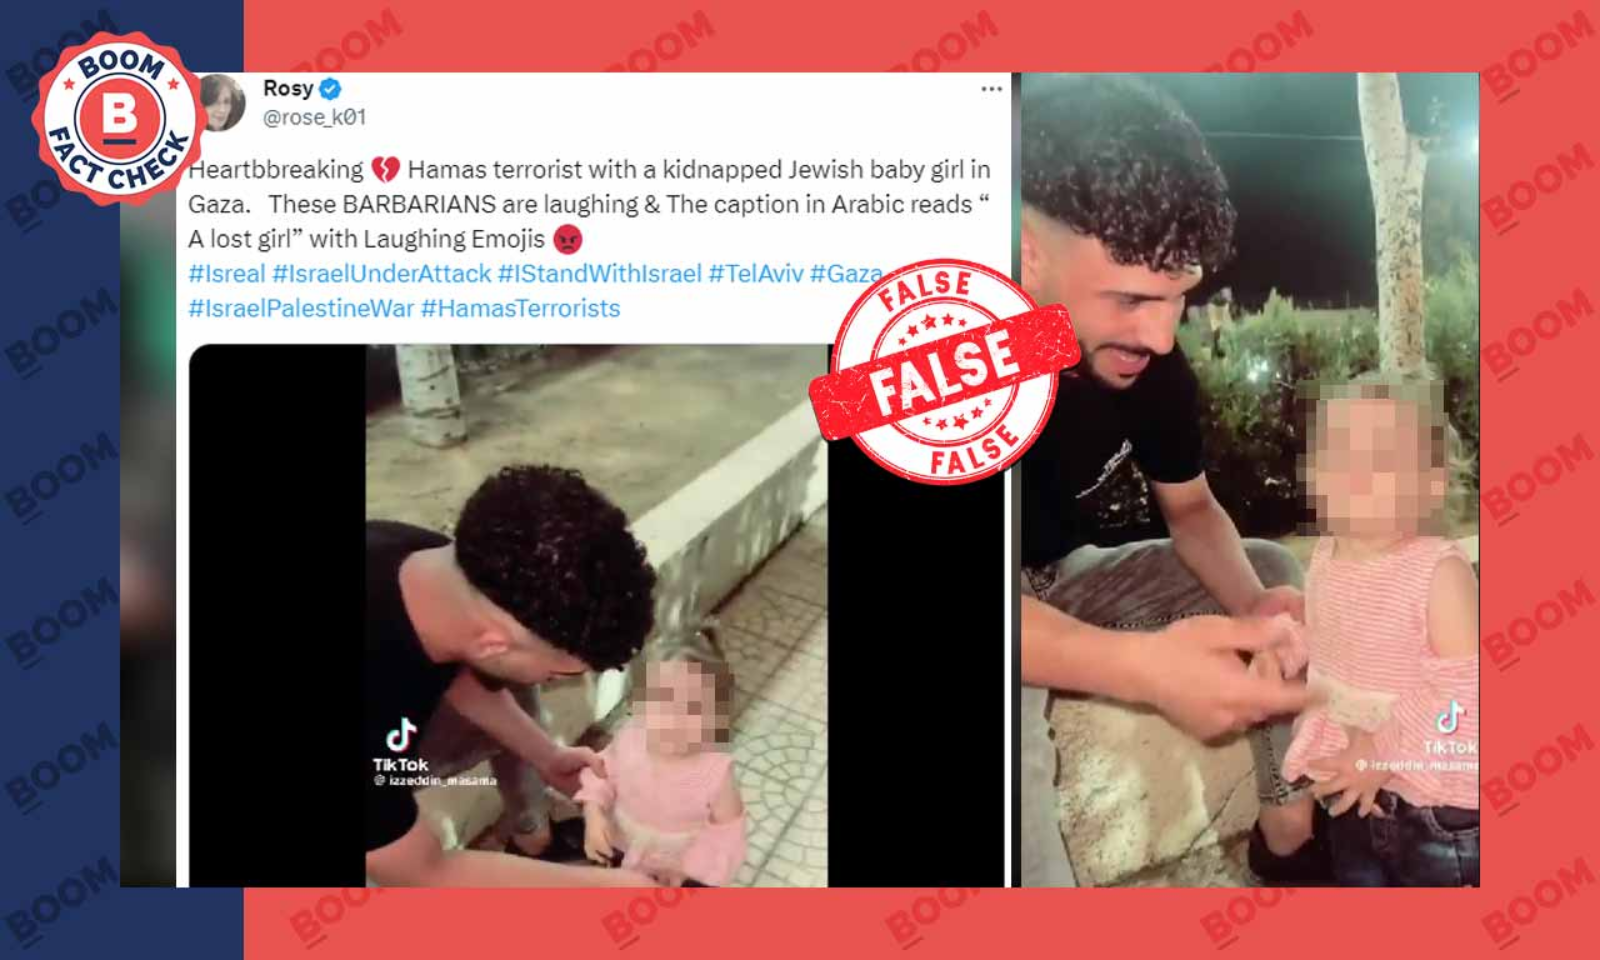 Fact Check: Video Shows 'Hamas Terrorist' with 'Kidnapped Jewish Baby Girl'  in Gaza?